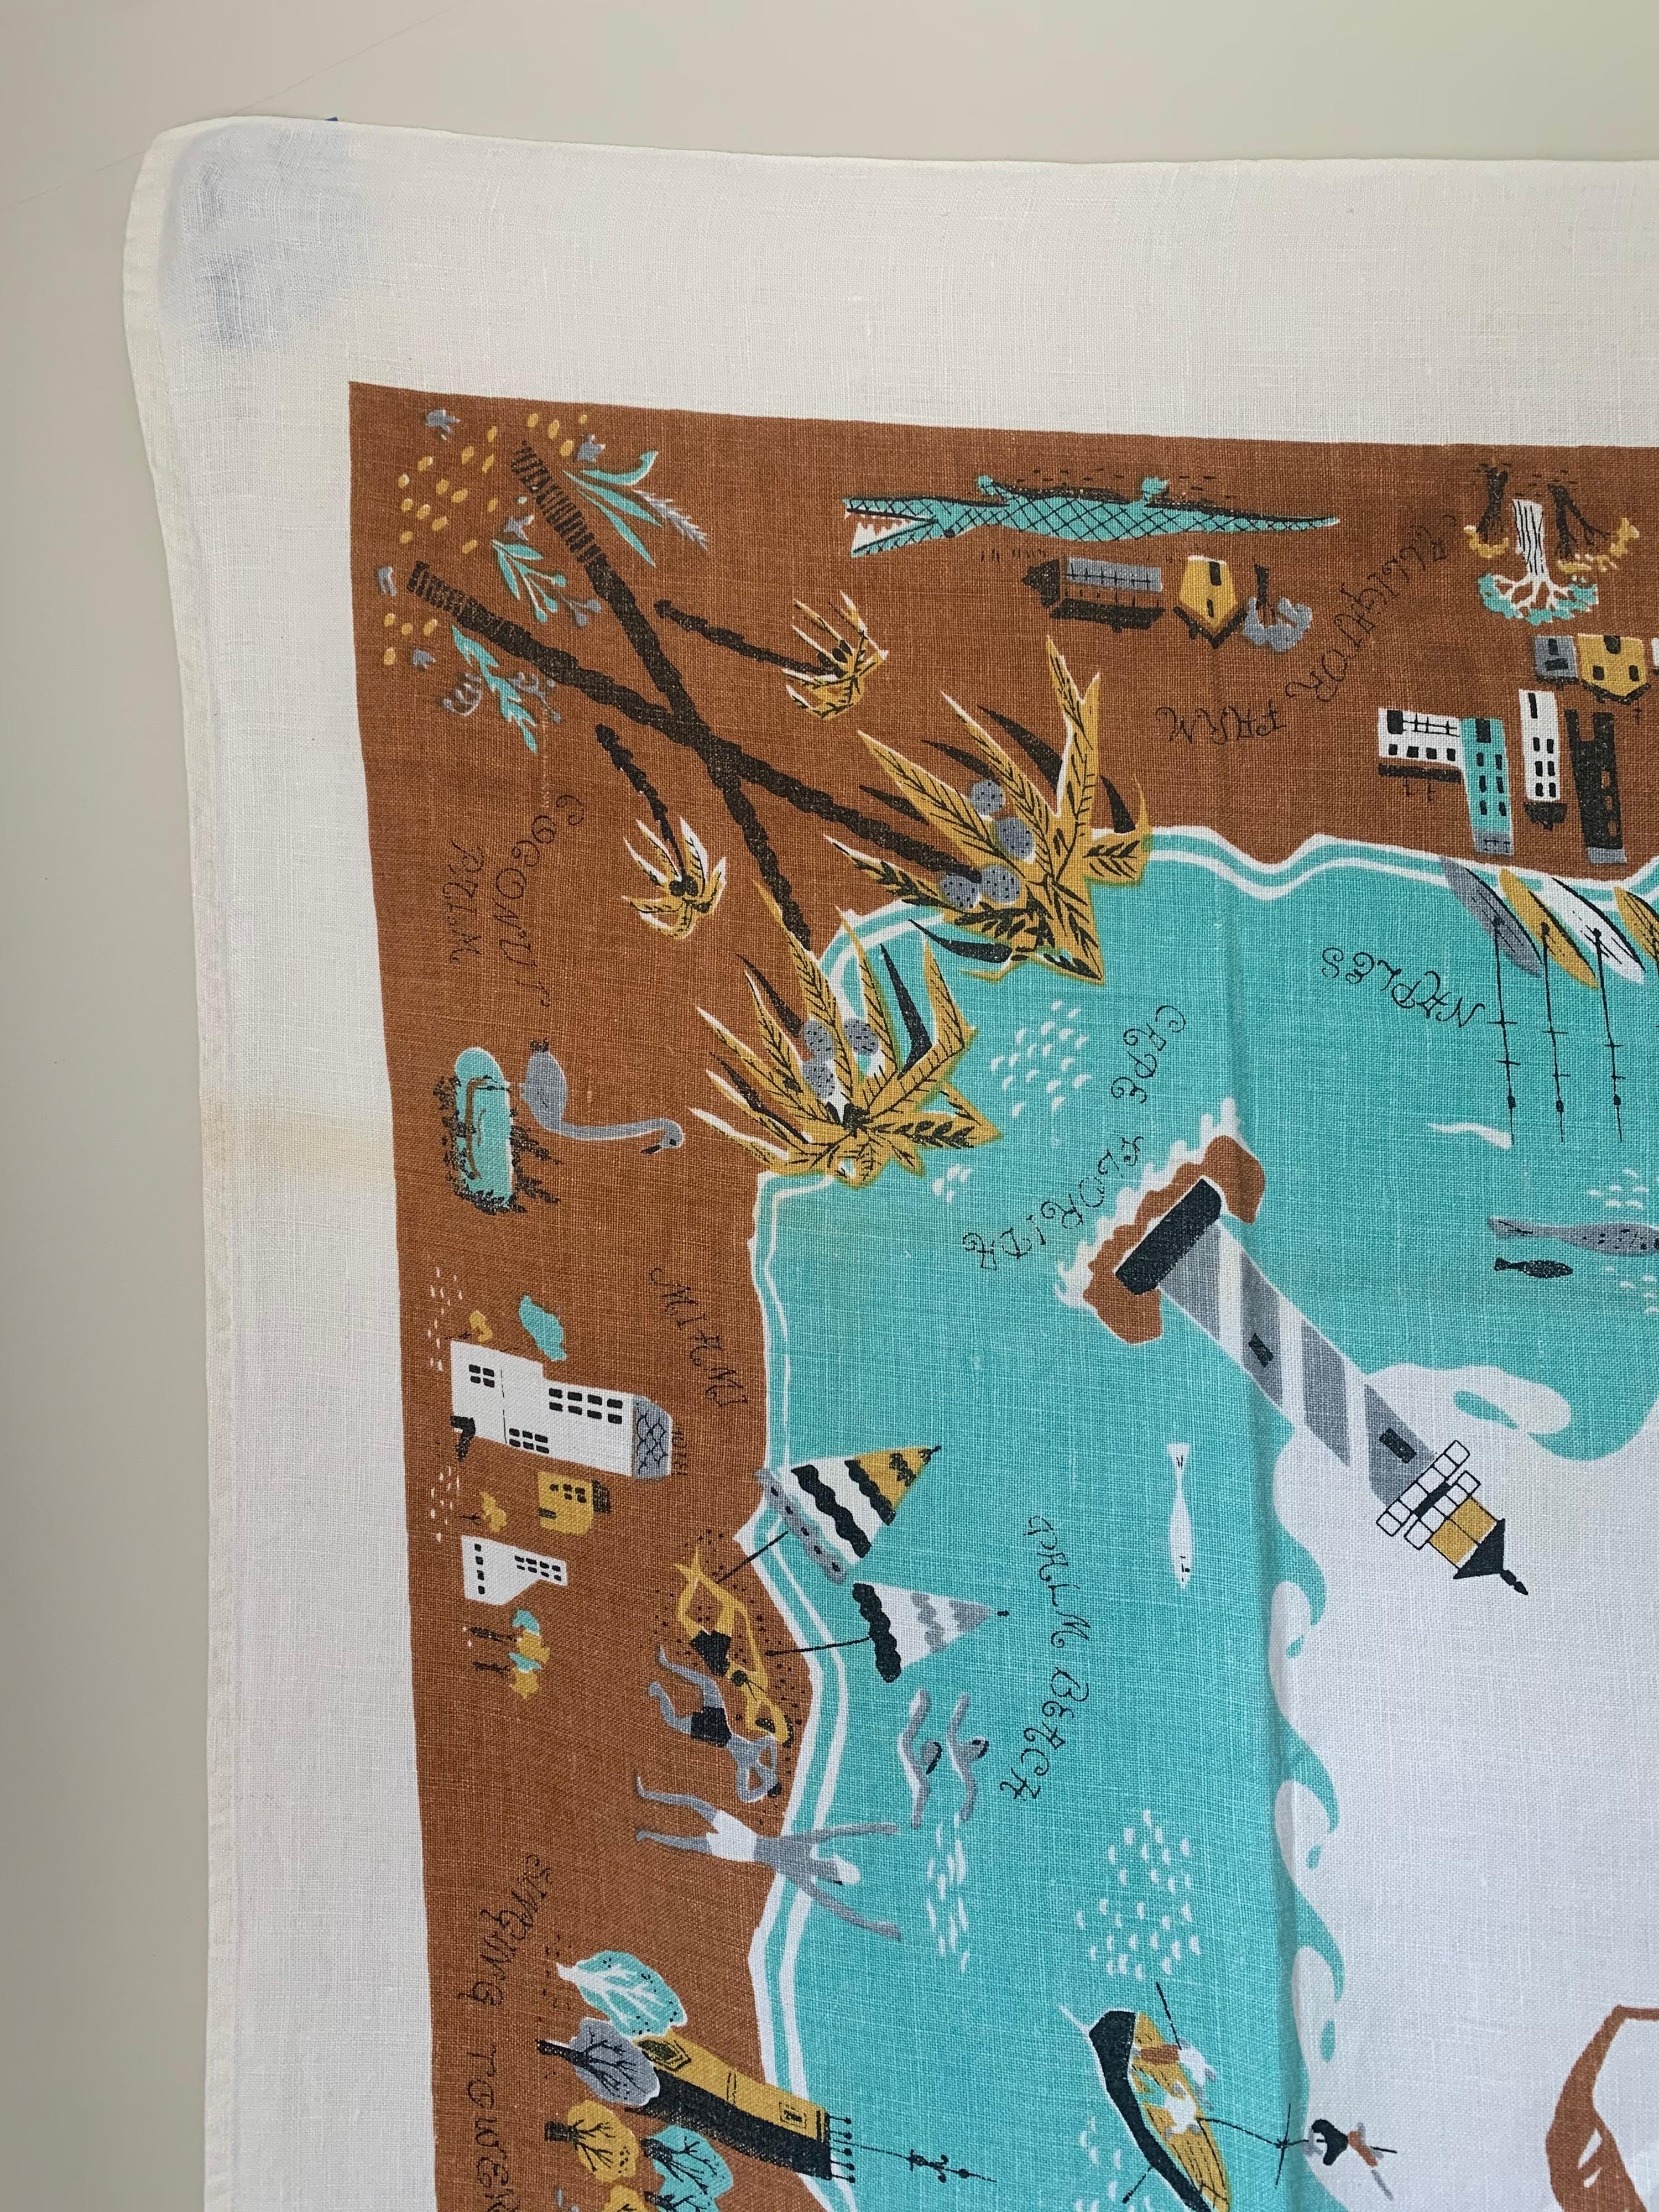 Midcentury Florida souvenir table cloth. White cotton table cloth with multi-color printed Florida landmarks. As found, lightly used condition. The cloth has been professionally pressed.